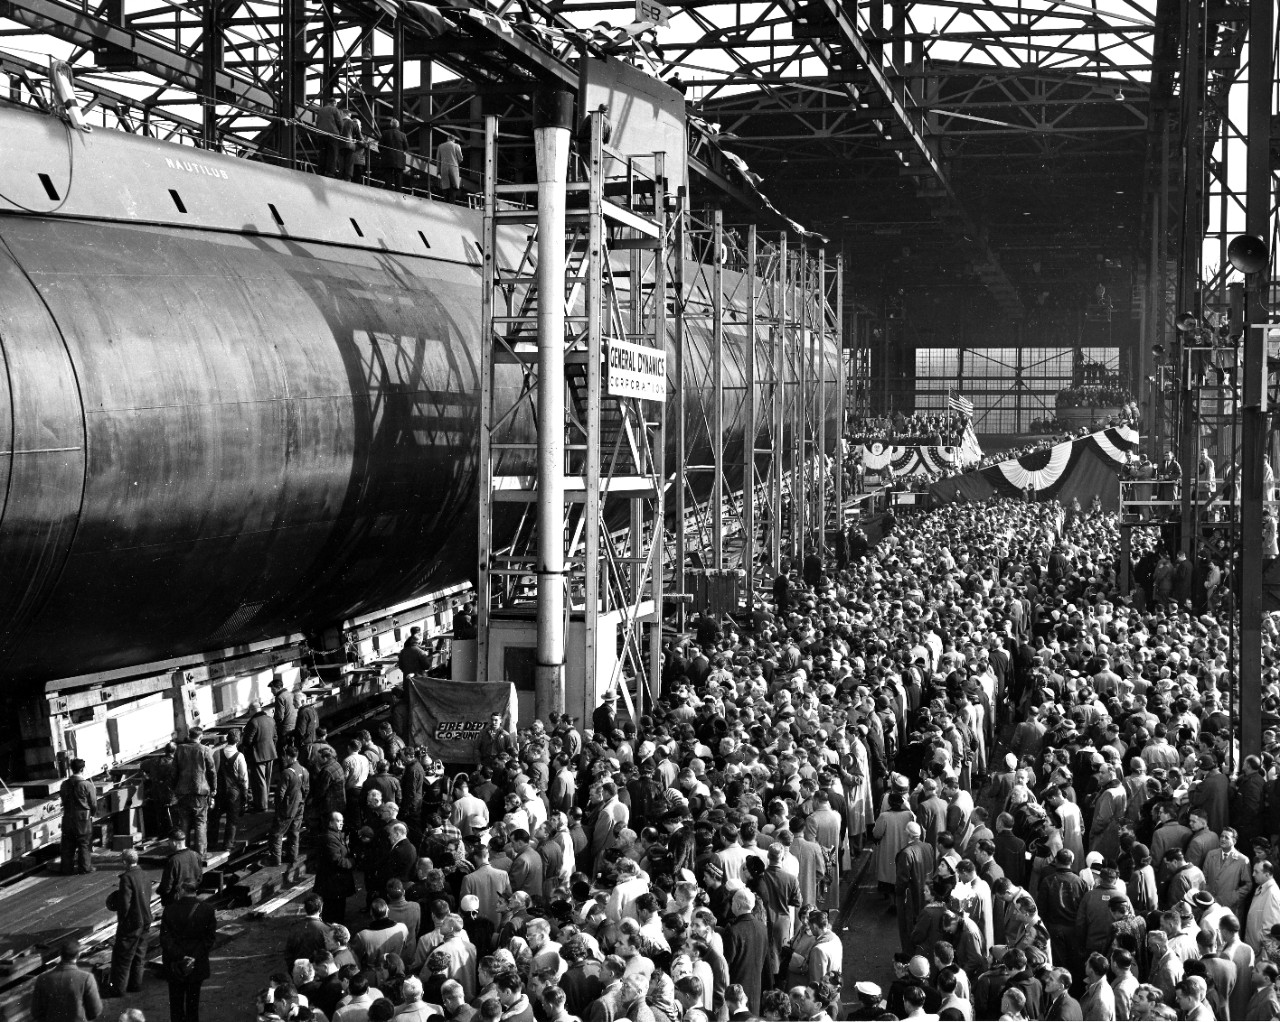 <p>Launching of the USS Nautilus (SSN-571) at the Electric Boat Co., Groton, CT at the launching. January 21, 1954.</p>